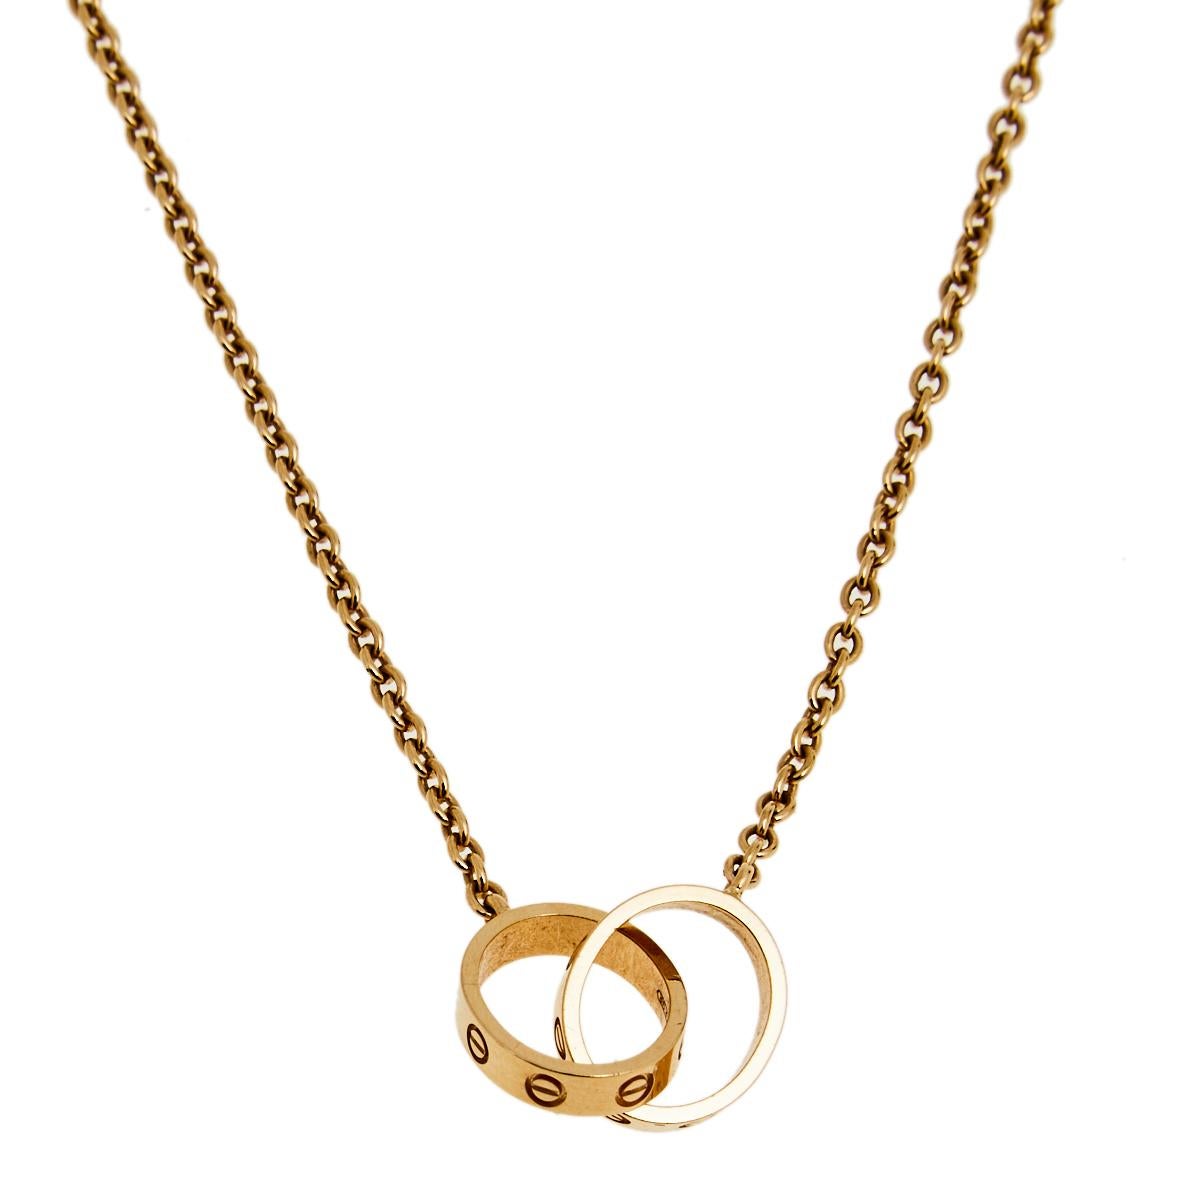 Celebrate timeless love with this necklace from Cartier's Love collection. It is sculpted from 18k rose gold, and the chain holds two magnificent hoops interlocked with one another. Both the rings carry the iconic screw motifs—a signature of the